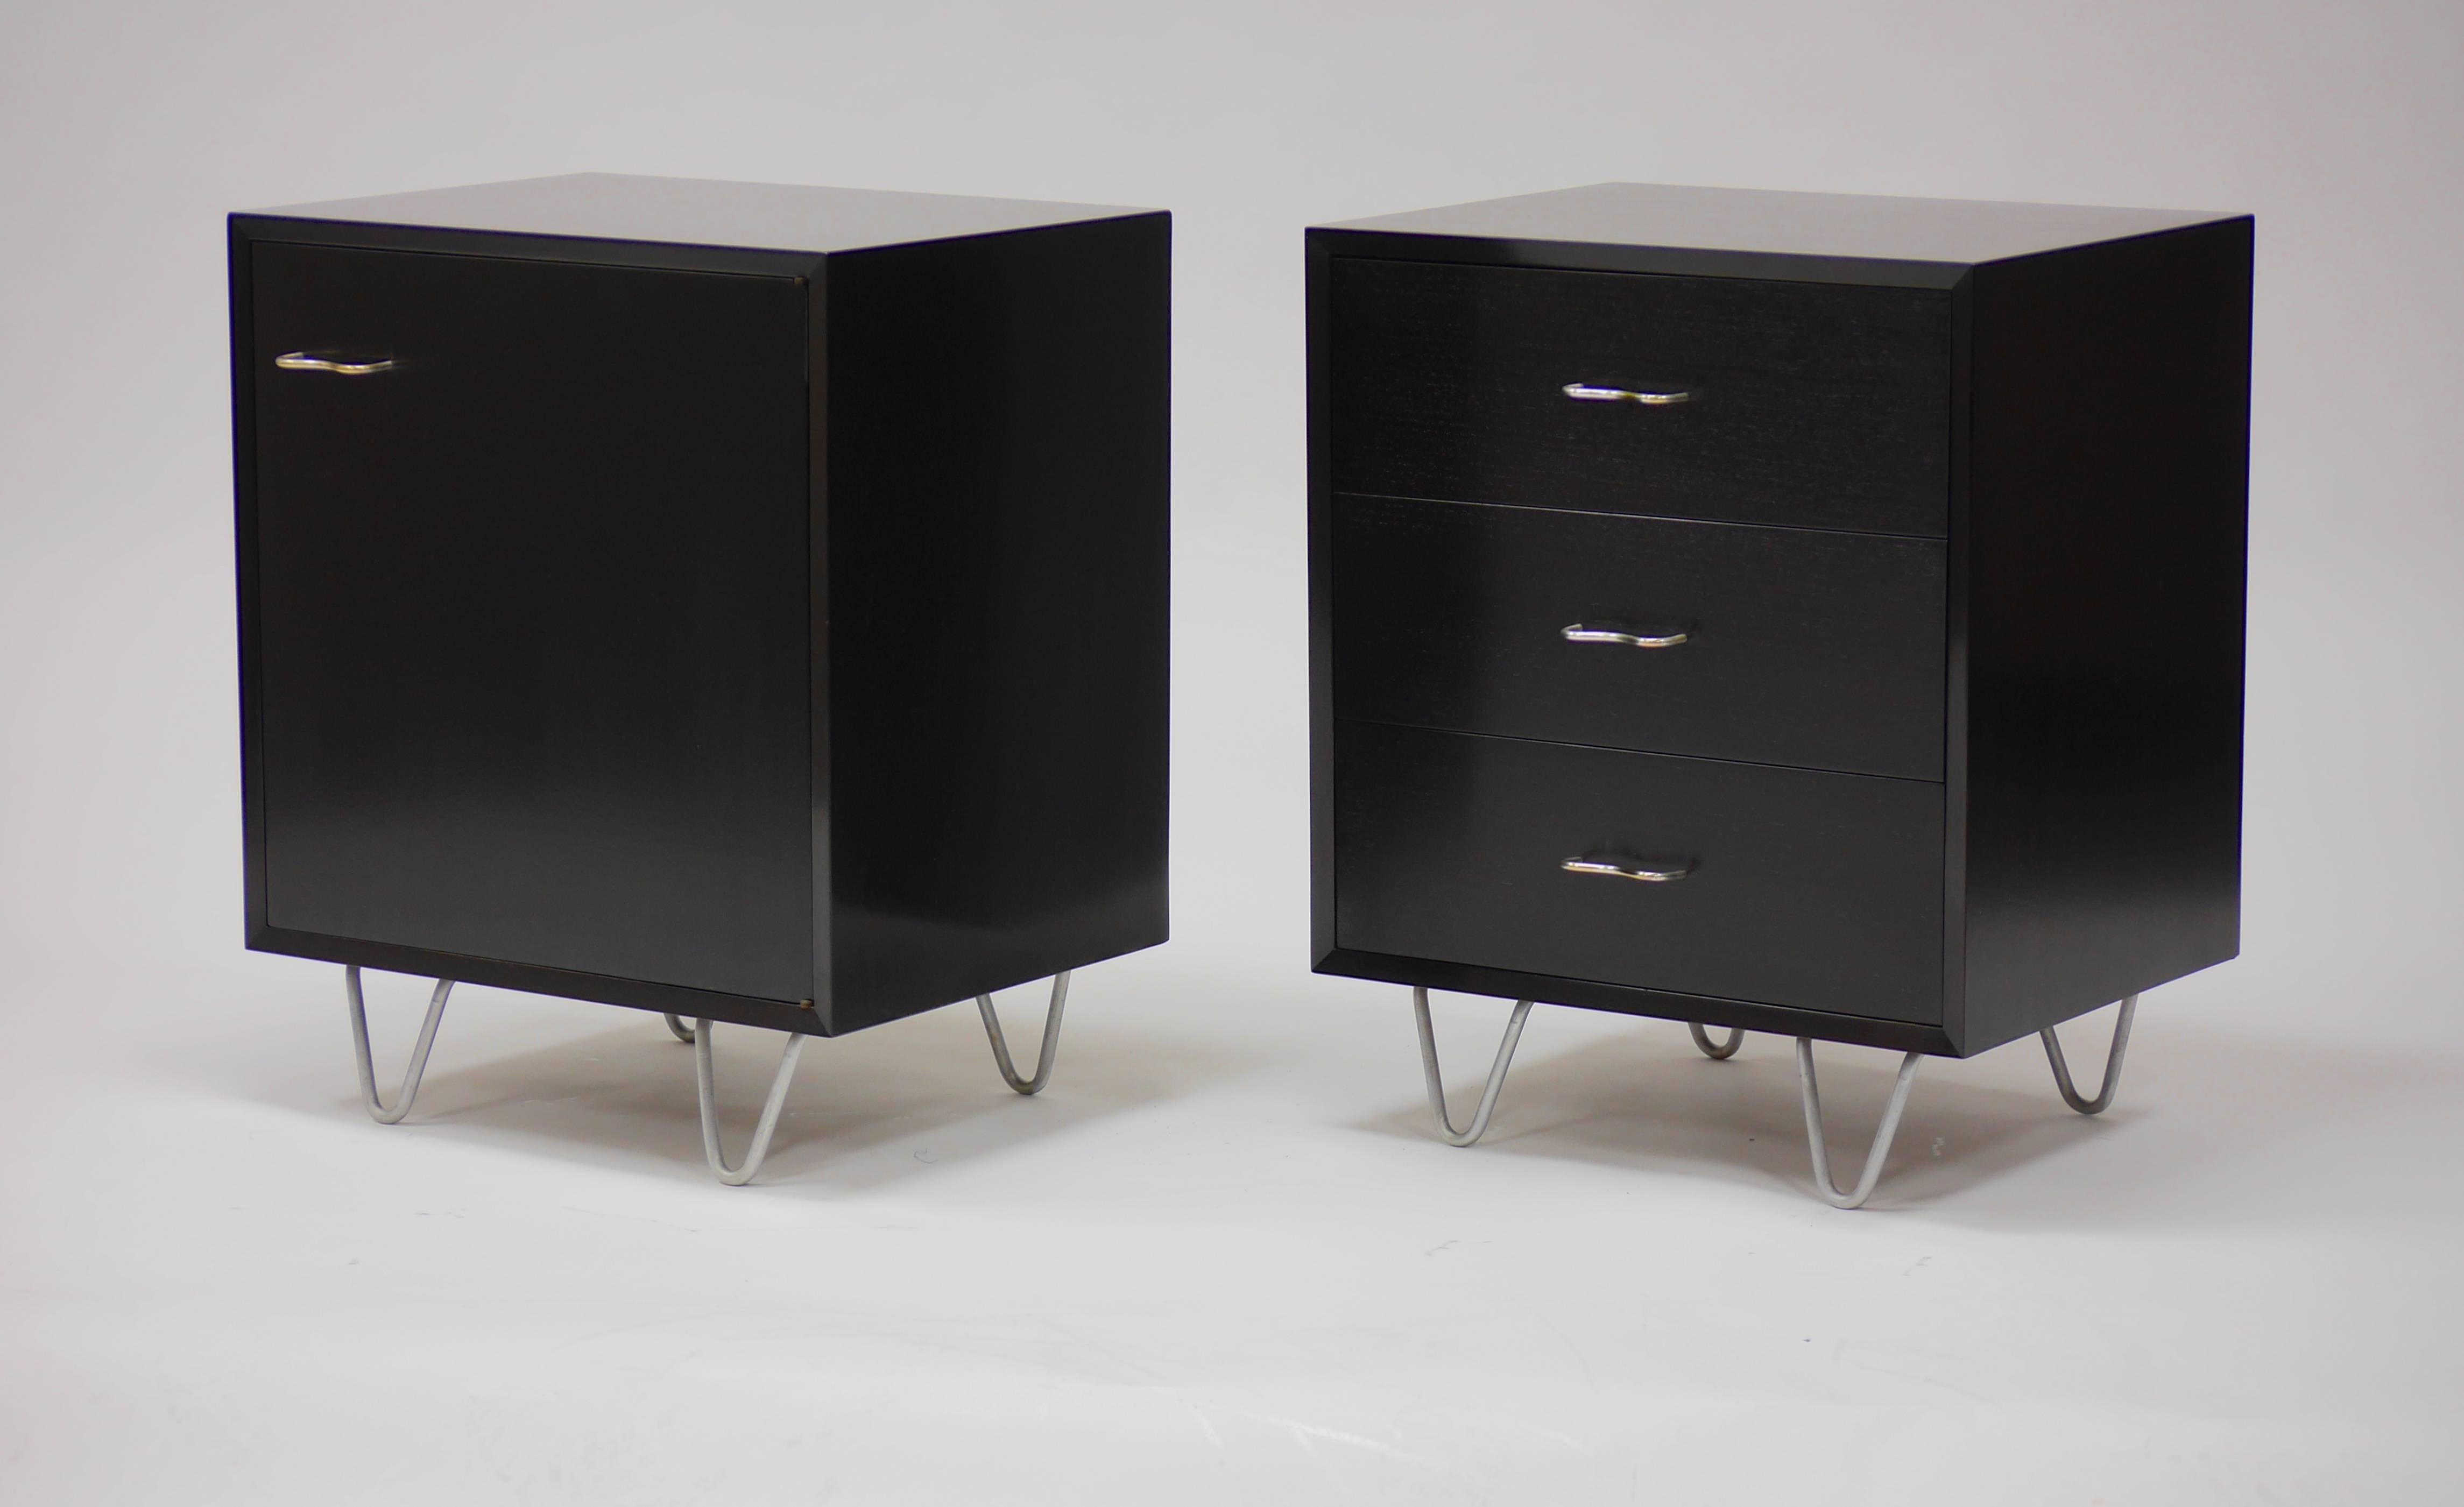 Pair of nightstands in dark walnut by George Nelson for Herman Miller. One having a single compartment with an adjustable shelf, the other three drawers. Both on hairpin legs.